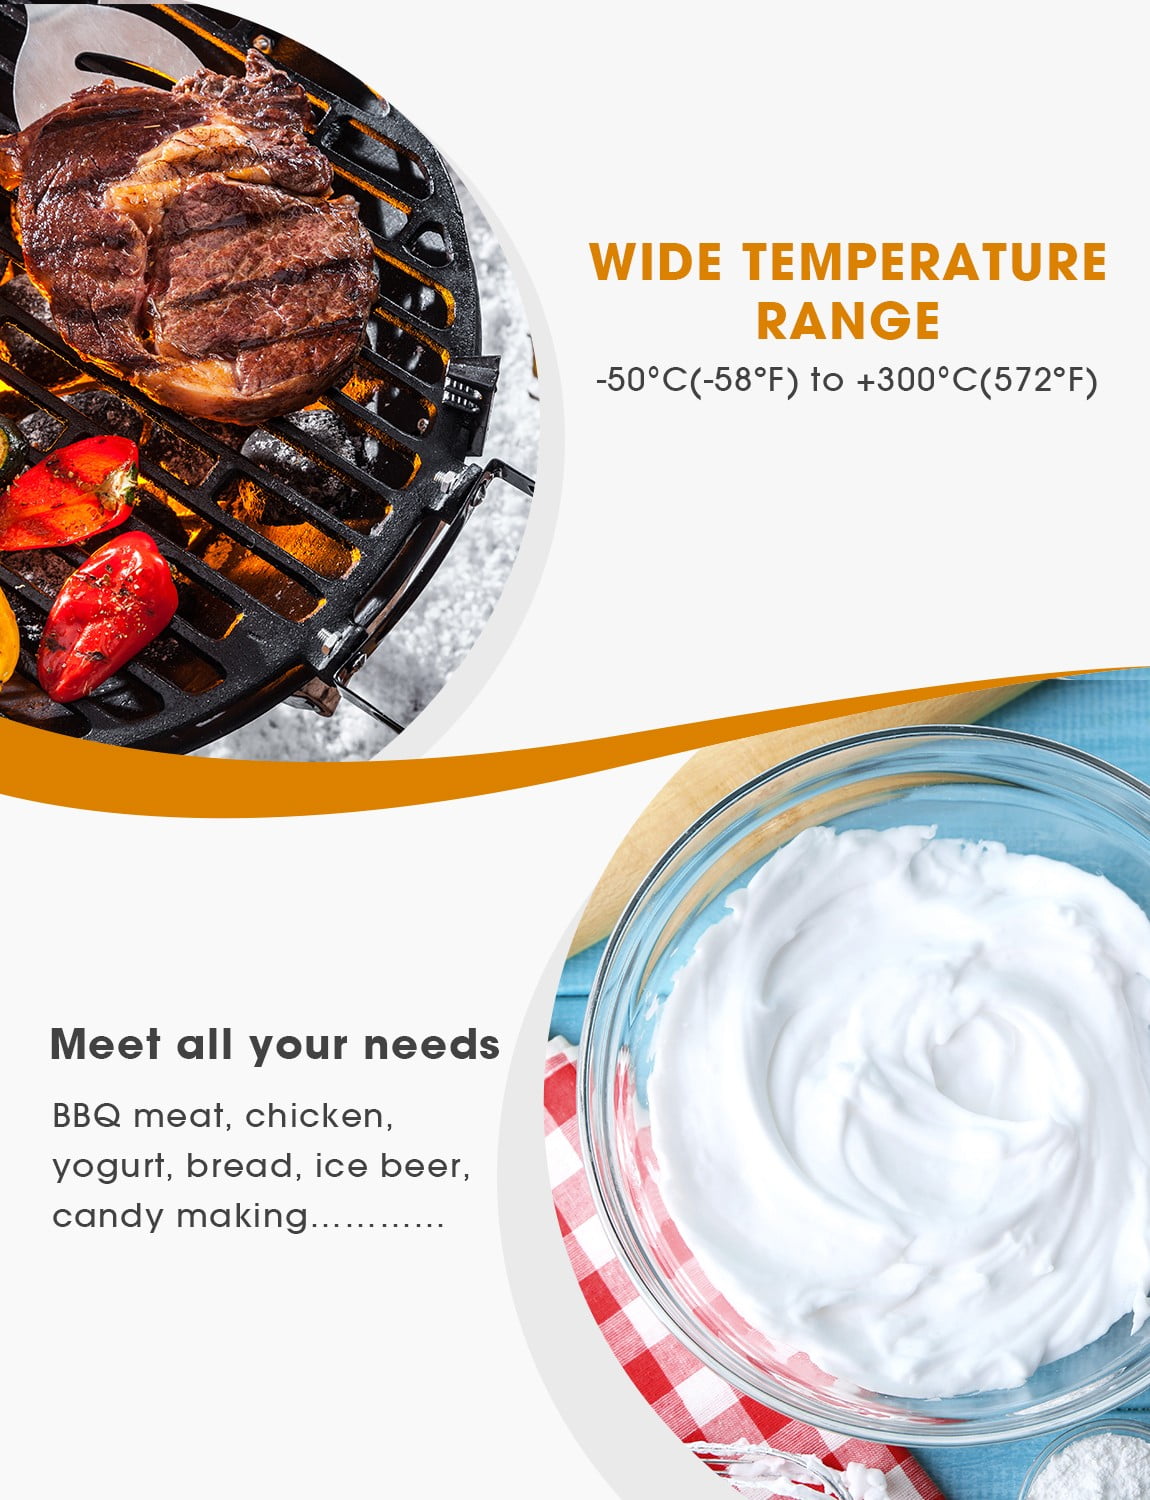  Typhur InstaProbe (Less Than .75 Seconds) Meat Thermometer  Digital, Instant Read Thermometer with OLED Display, IP67 Waterproof for  Grill, BBQ, Cooking, Smoker, Home Brewing: Home & Kitchen